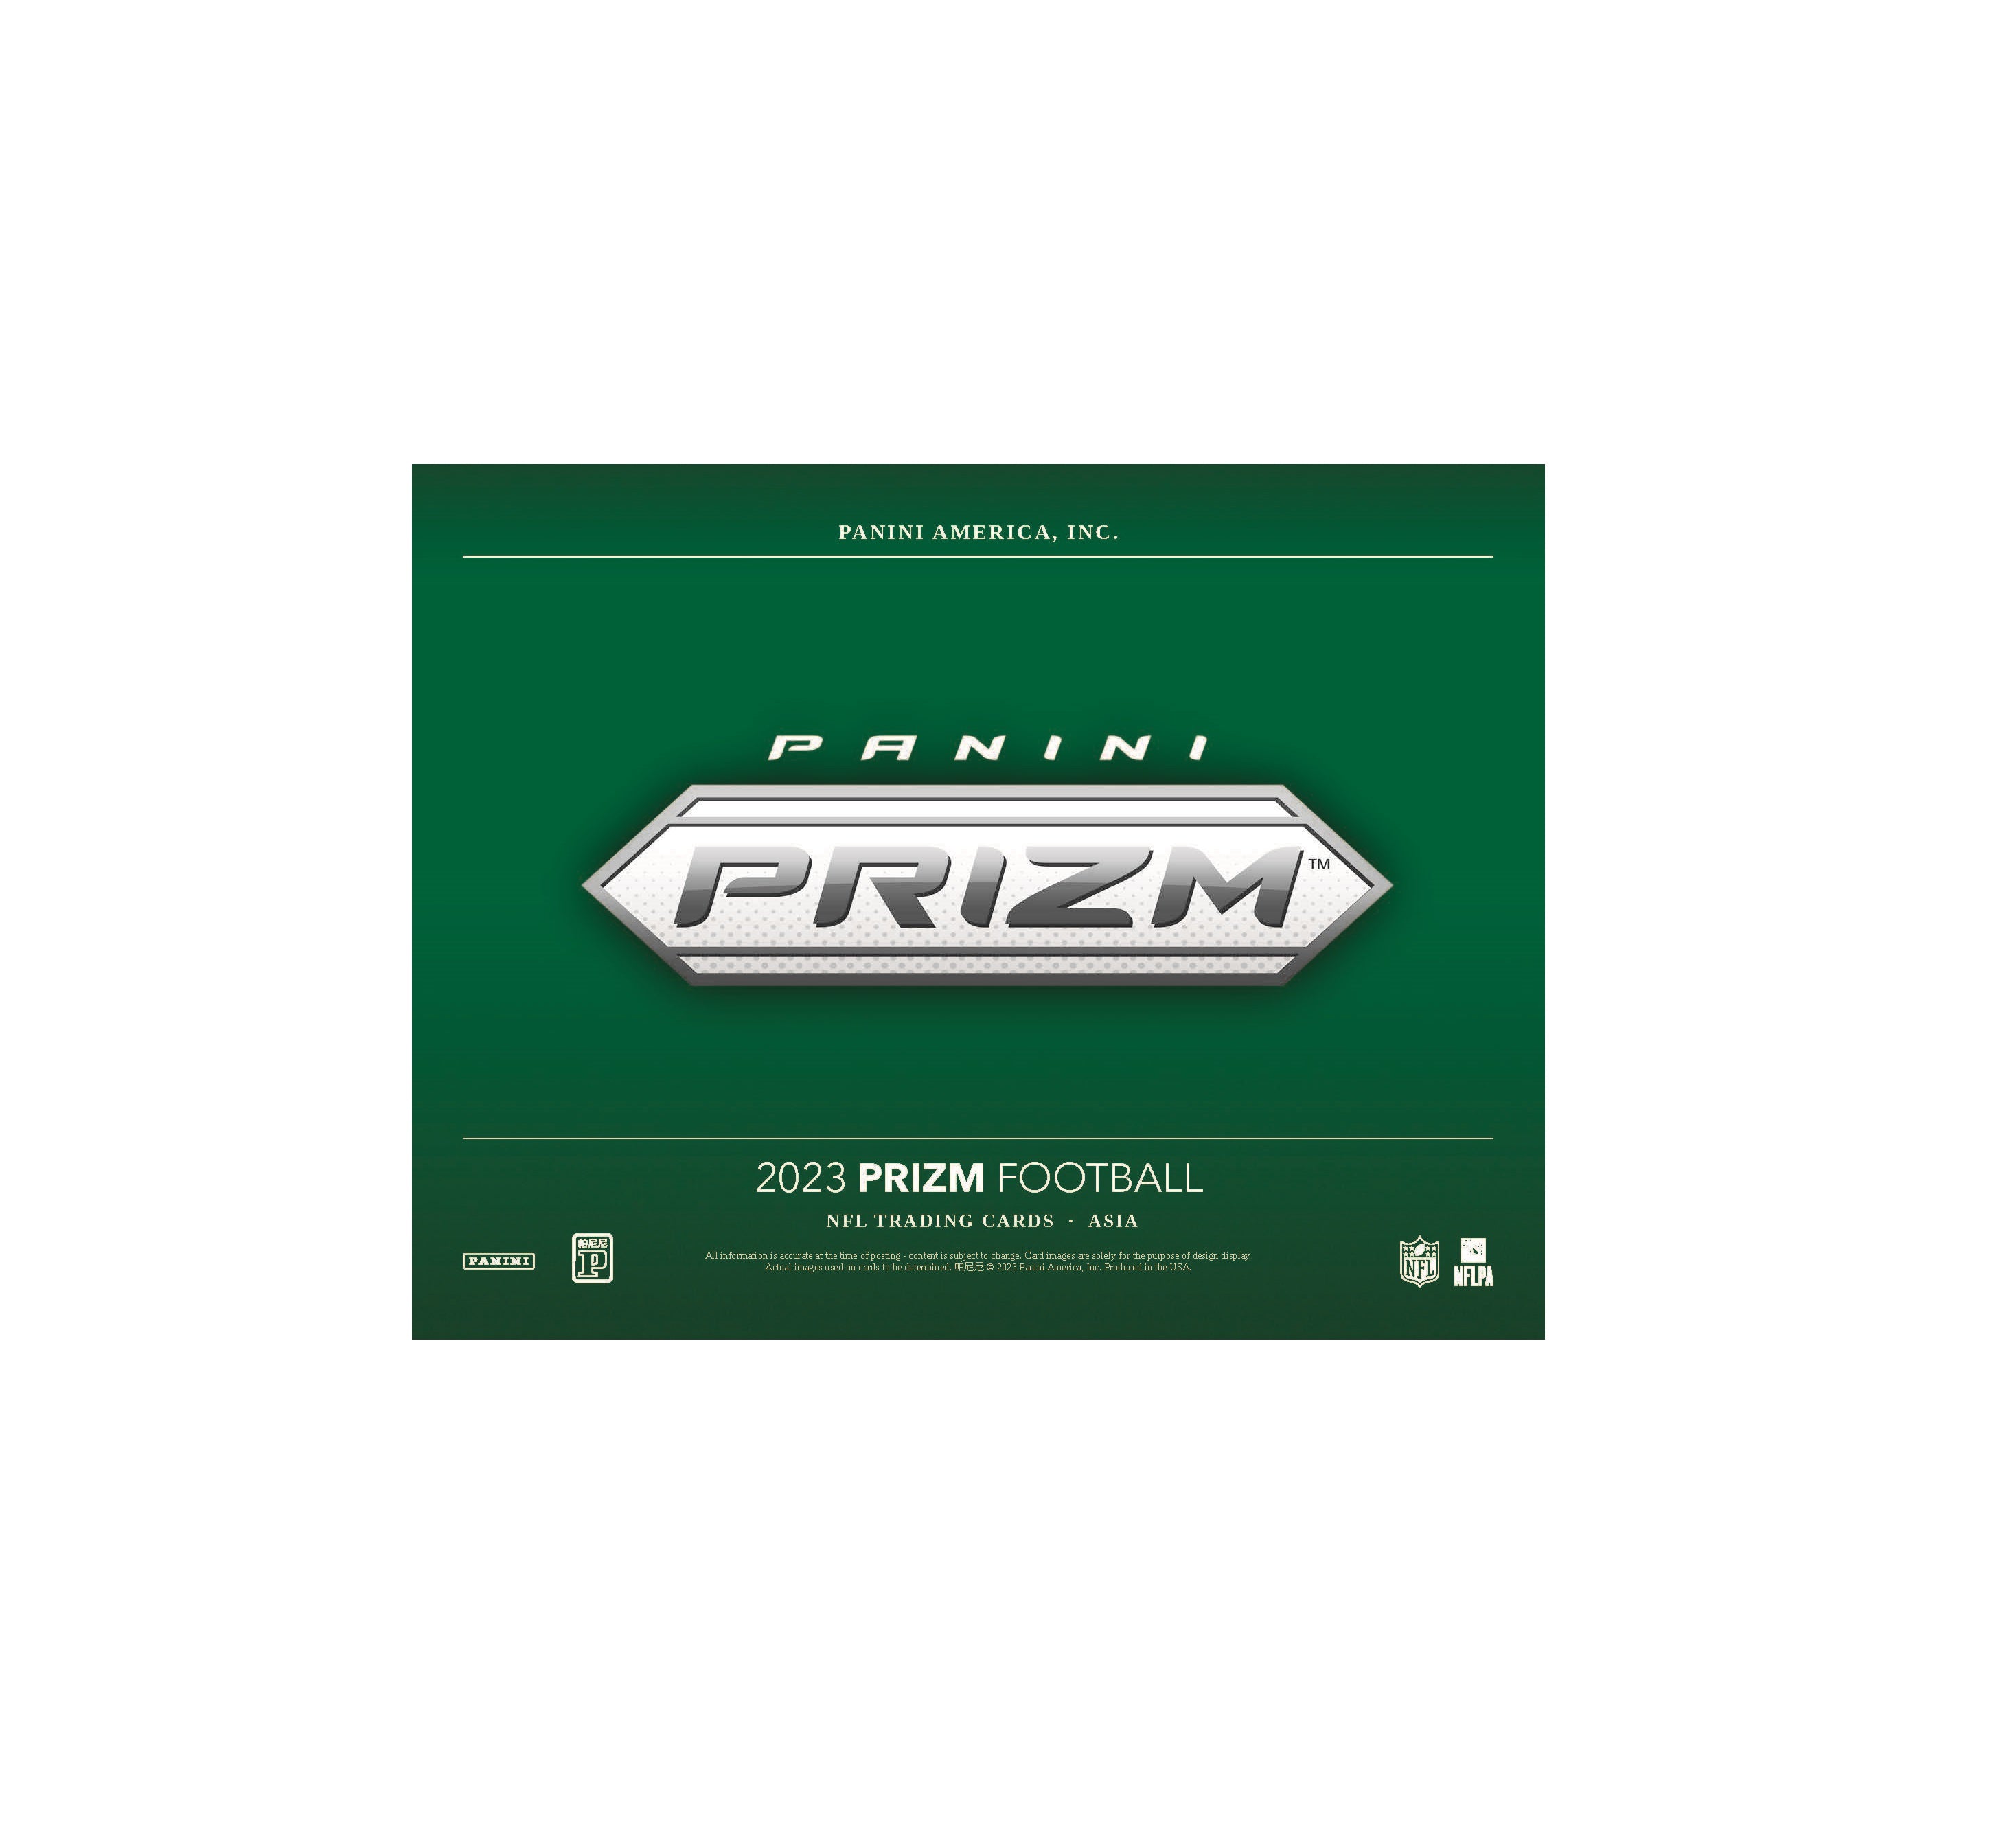 2023 Panini Prizm Football Tmall Asia (Release Date The end of March)